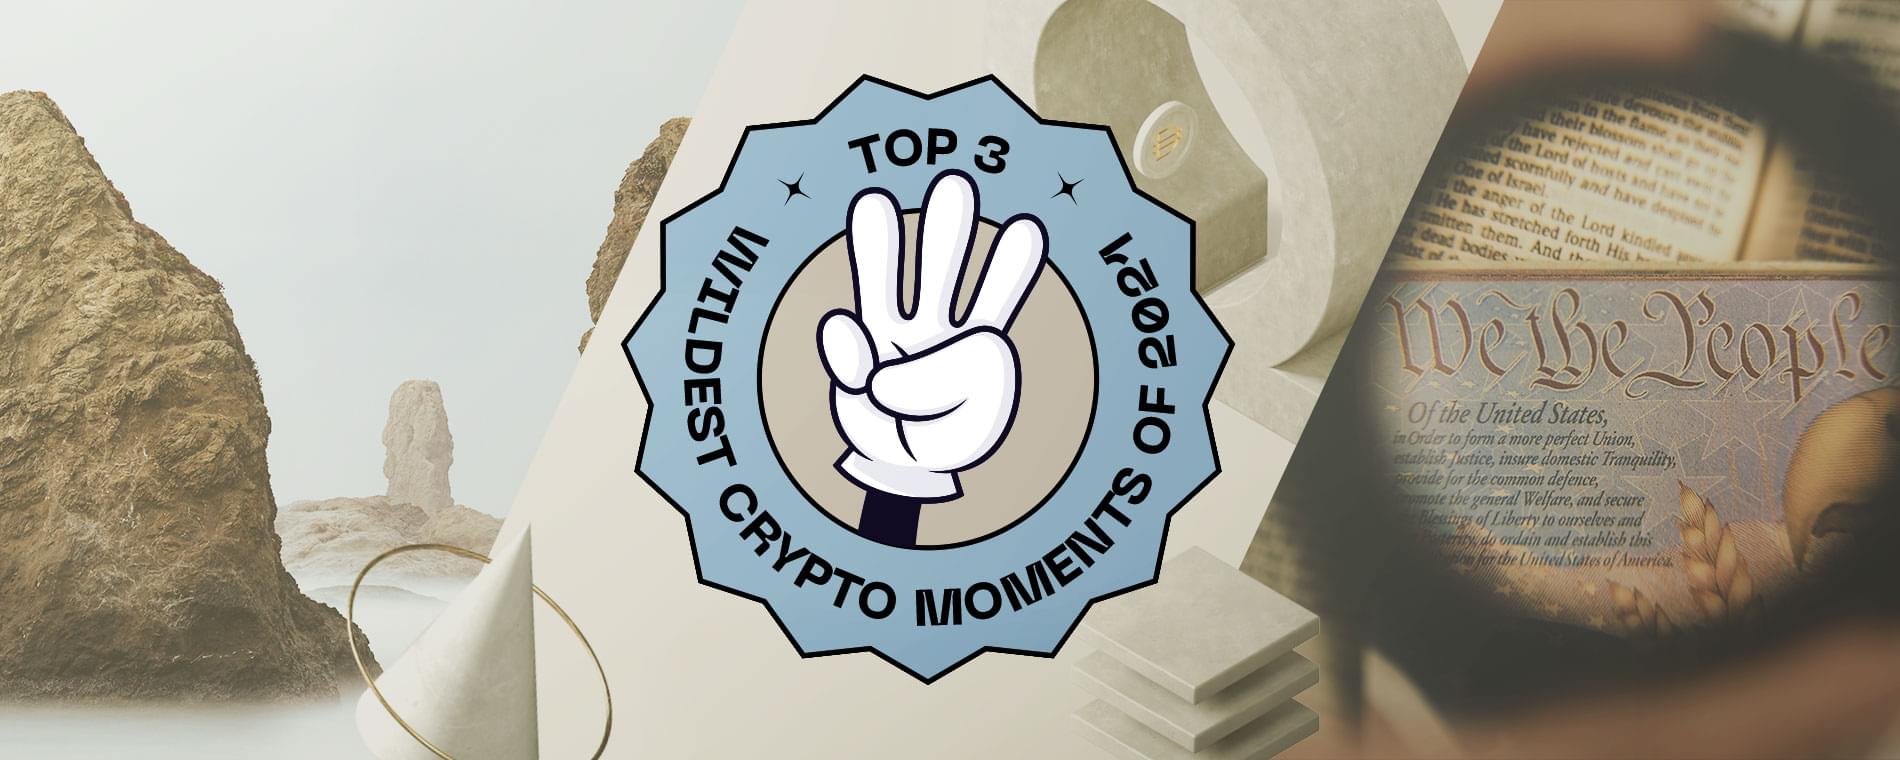 Top 3 wildest crypto moments of 2021